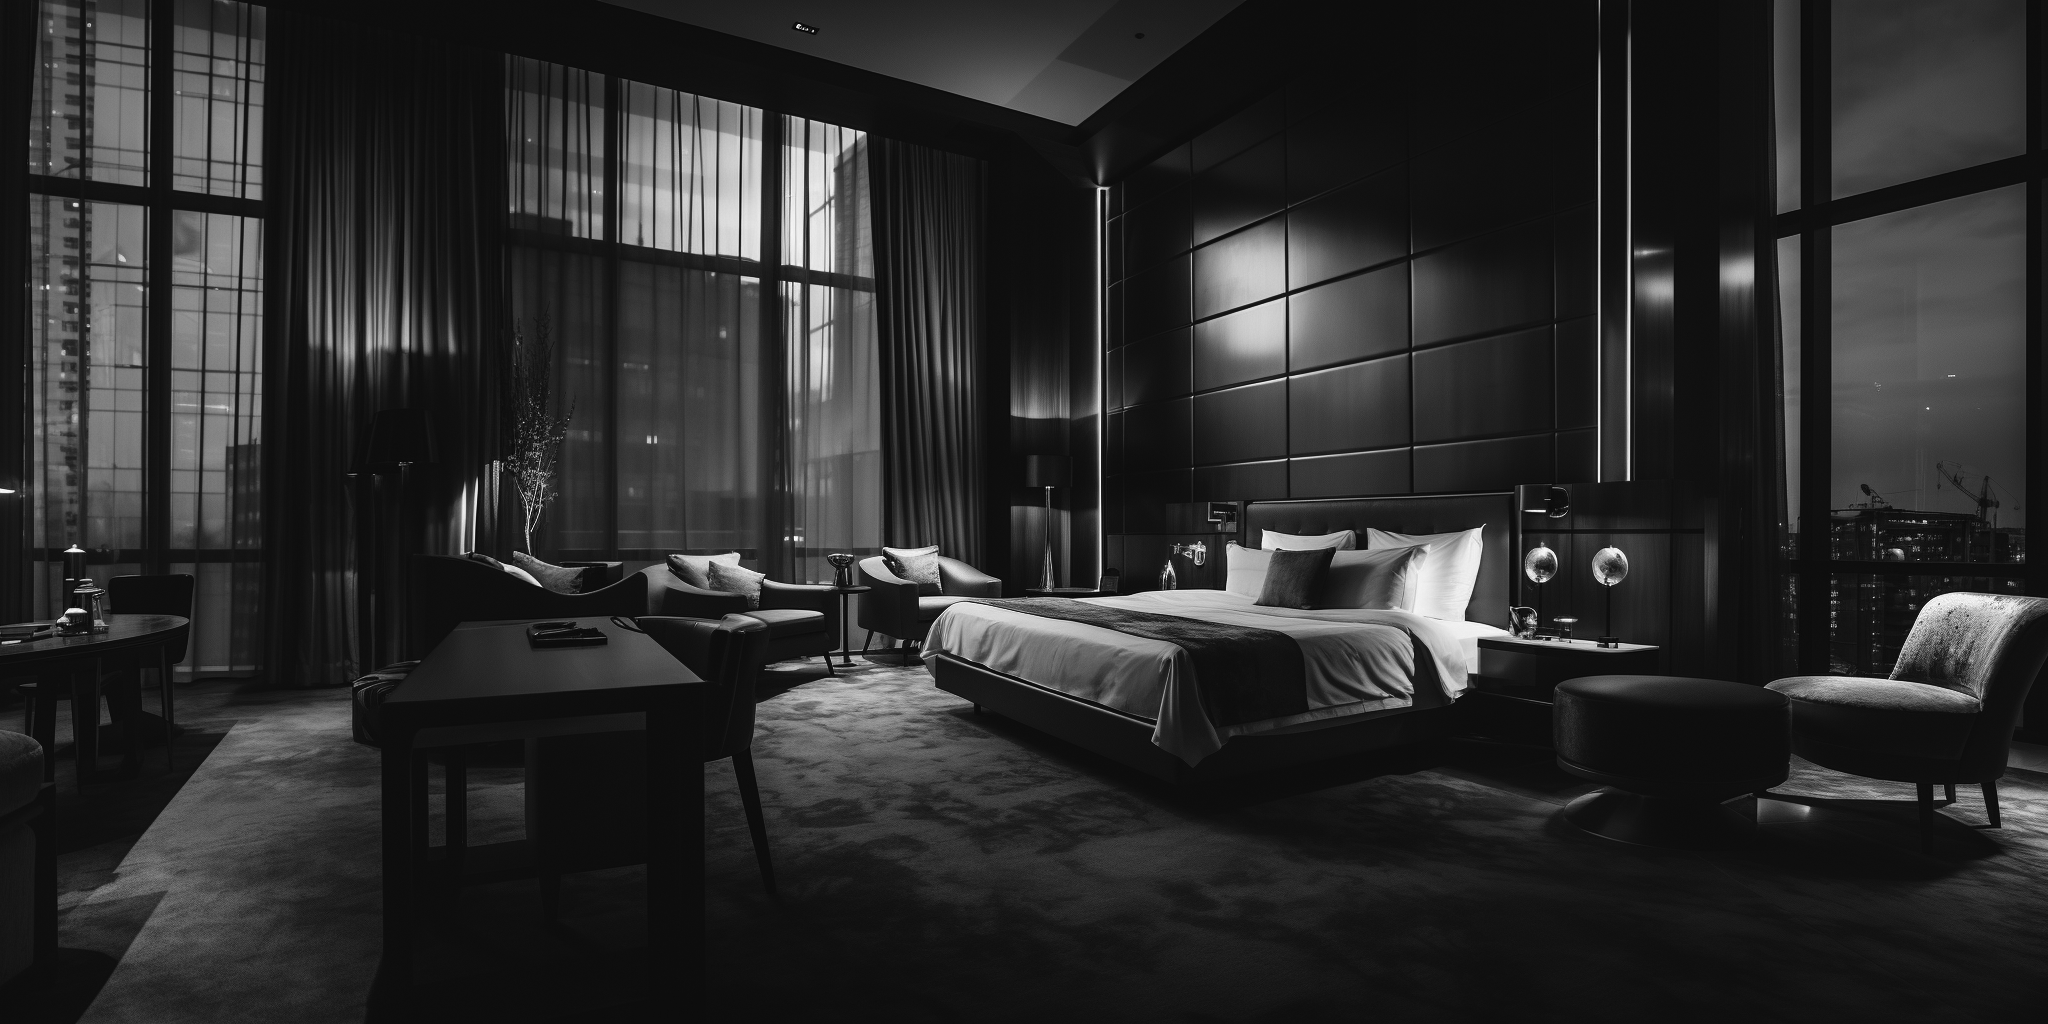 Black and white image of a luxurious hotel room interior at night with large windows and city view.